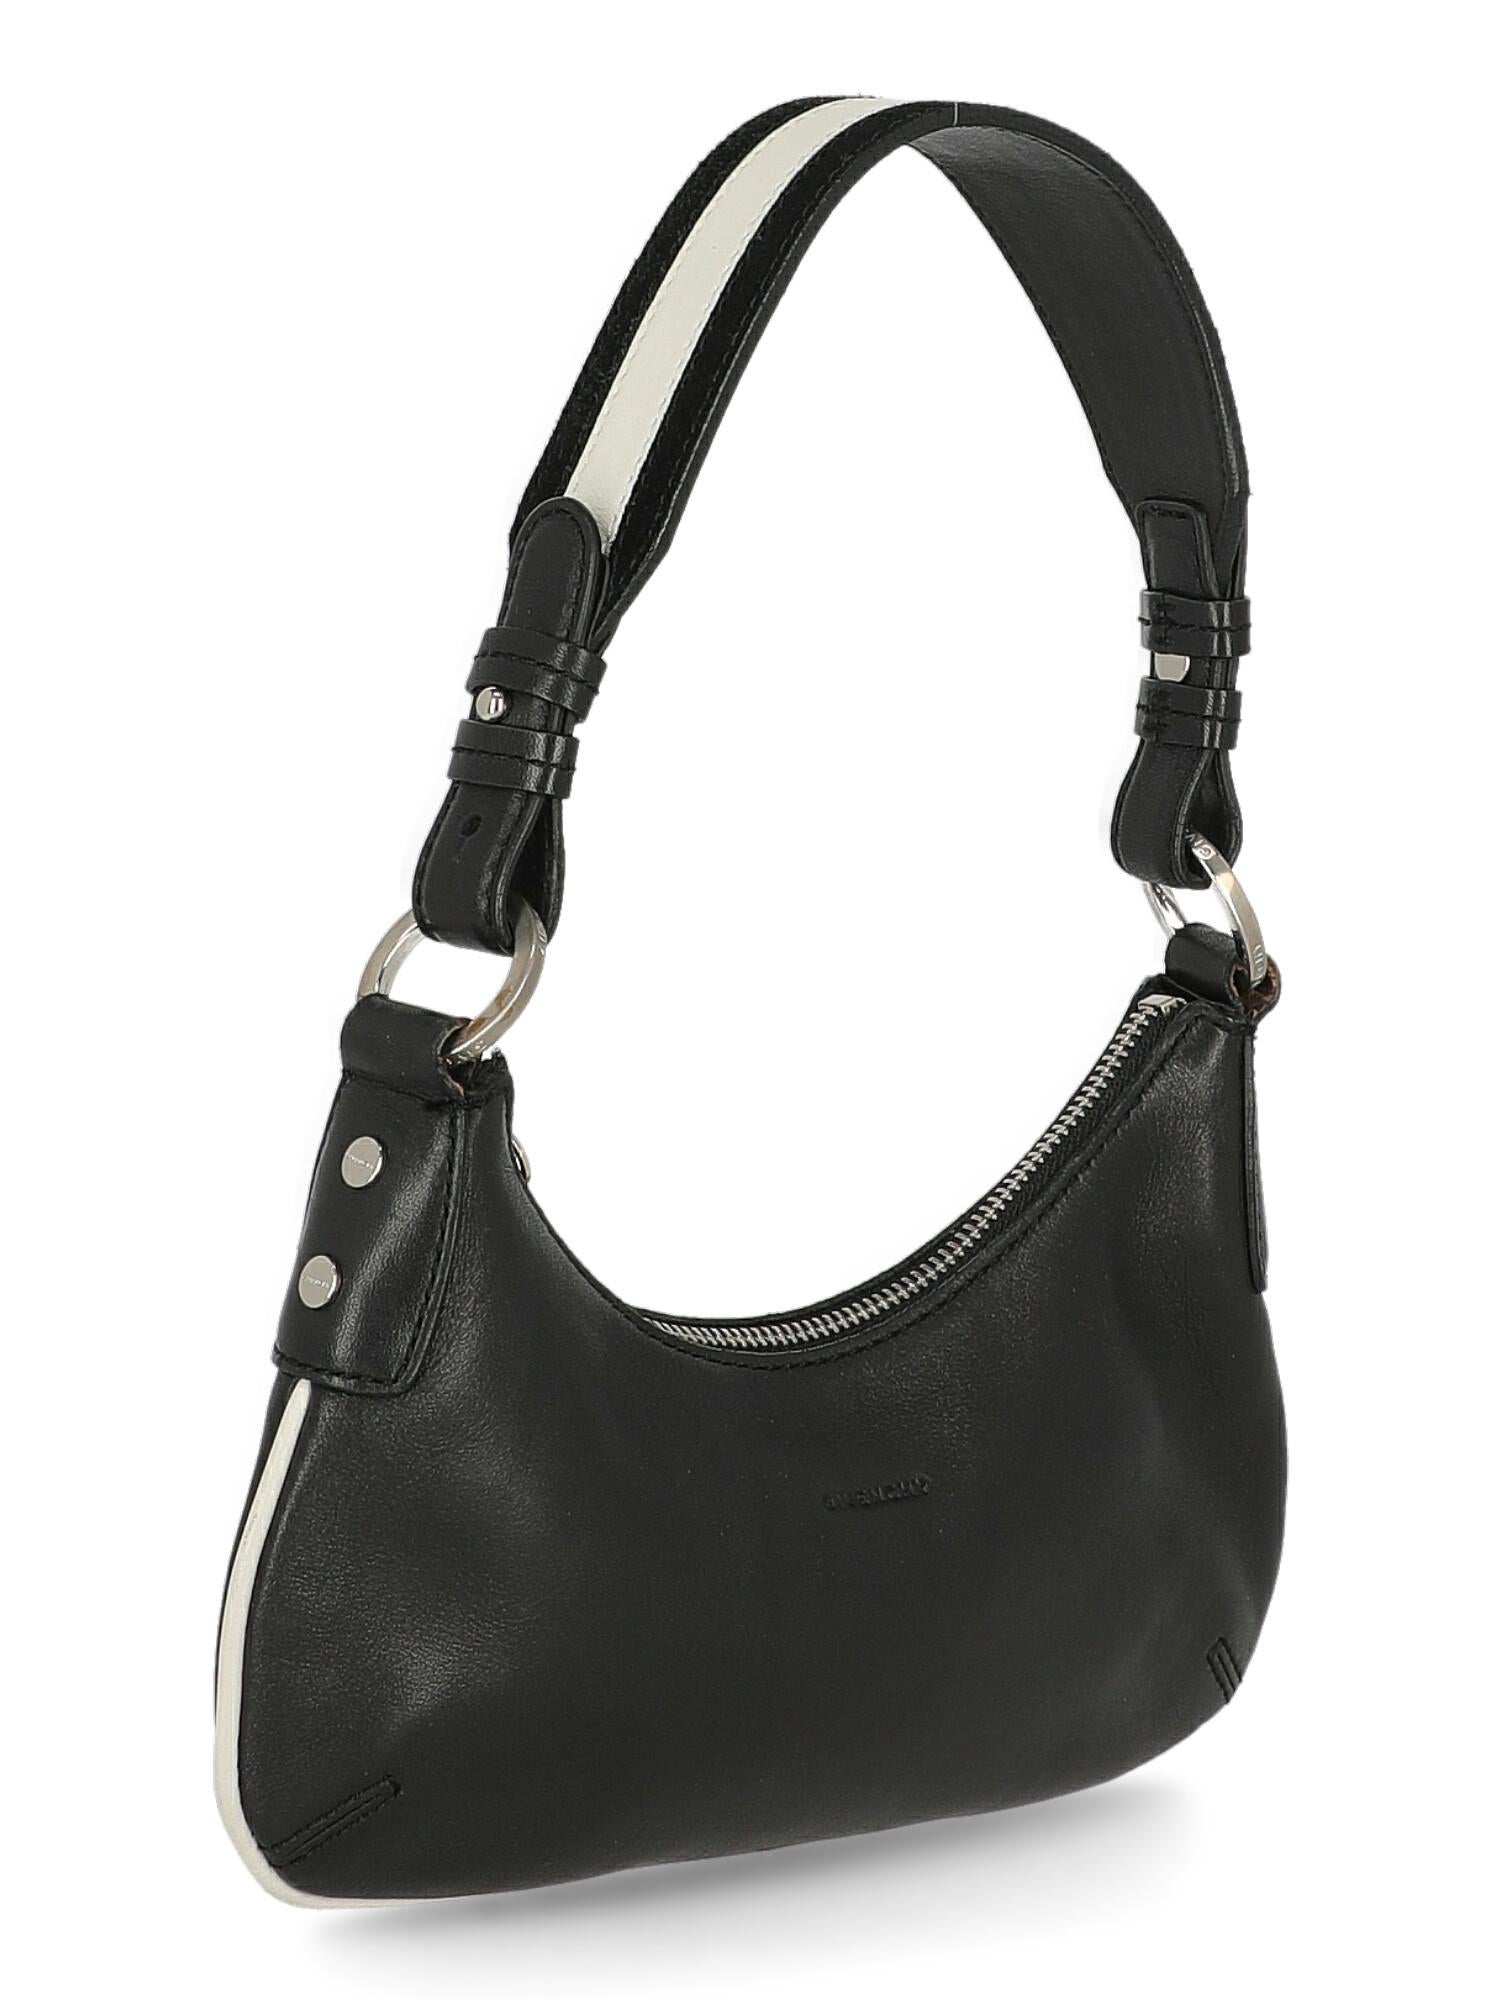 Givenchy  Women   Shoulder bags   Black Leather  In Fair Condition For Sale In Milan, IT